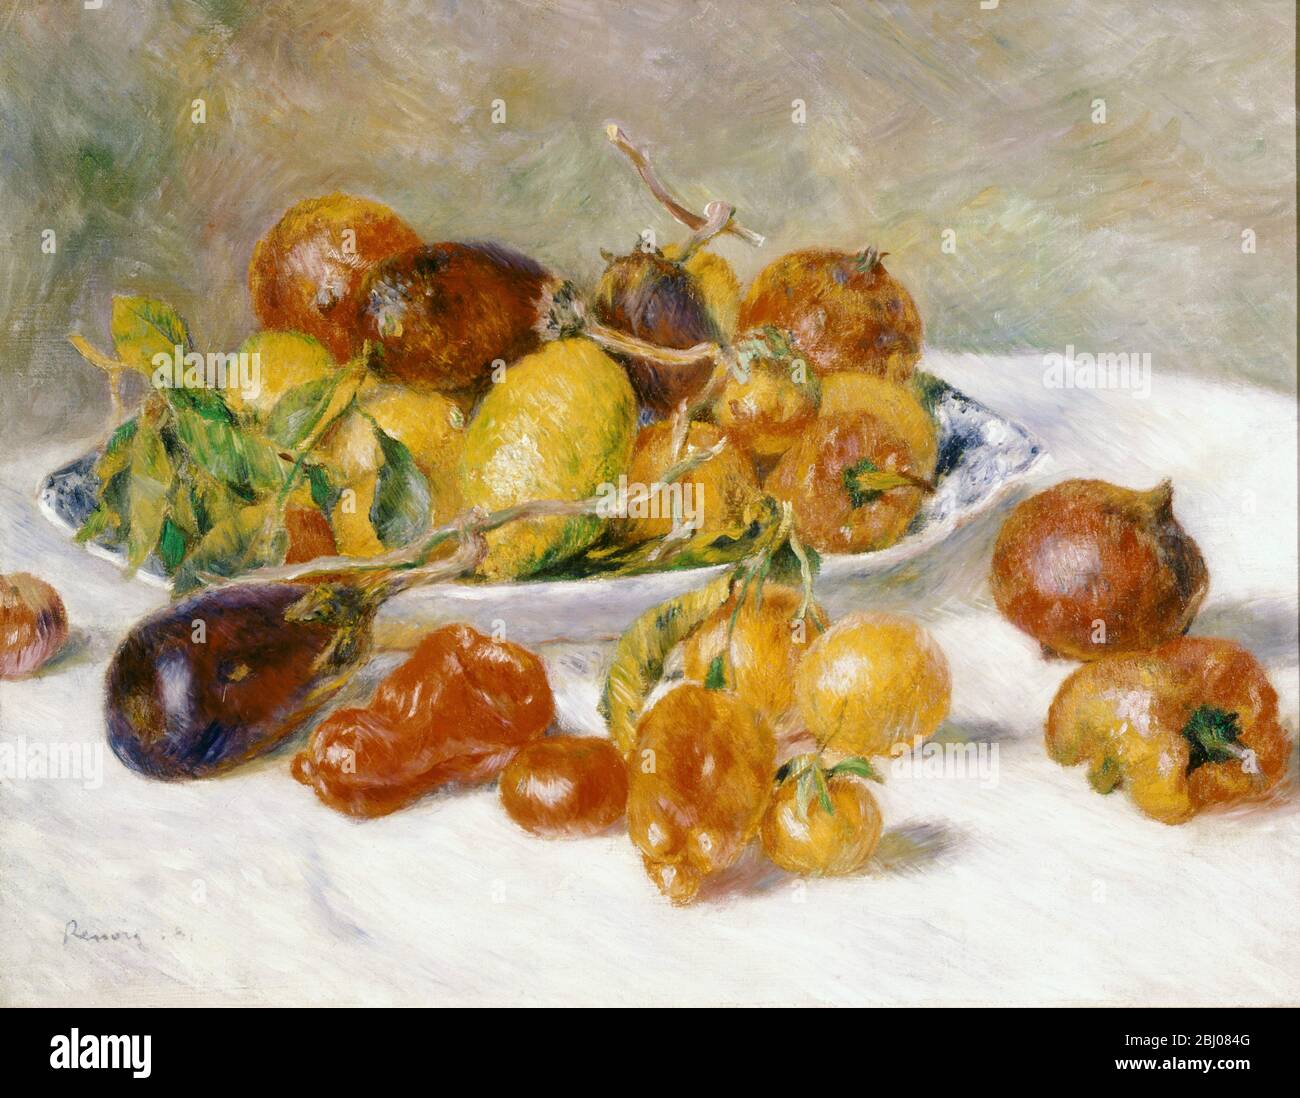 Fruits du Midi - by Pierre Auguste Renoir ( 1841 - 1919 ) - Pierre-Auguste Renoir (February 25, 1841 - December 3, 1919) was a French artist who painted in the impressionist style. - Stock Photo